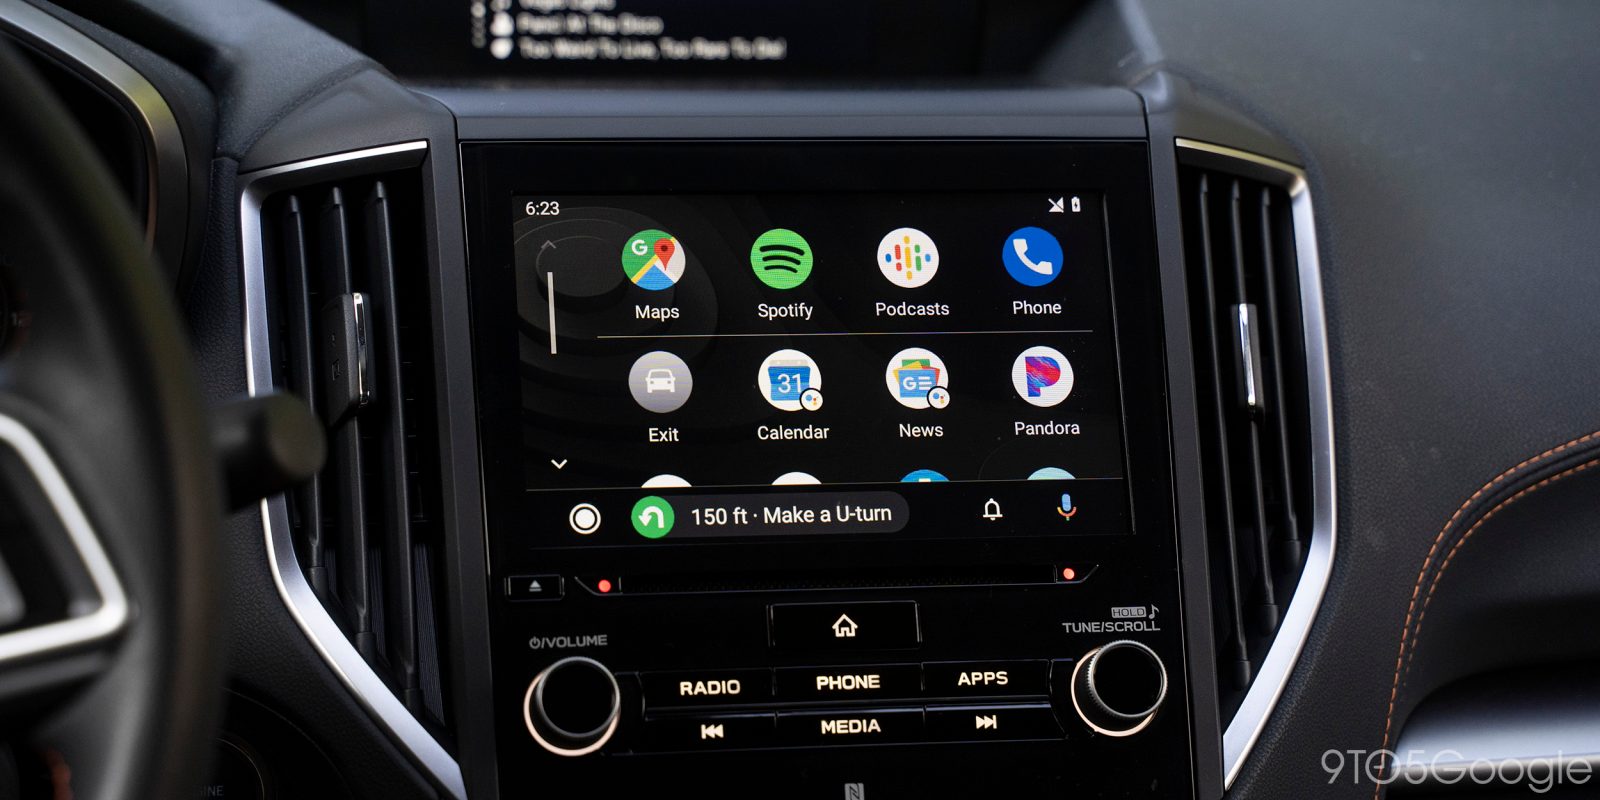 Android Auto 4.7 prepares hiding apps, adds media notifications [APK